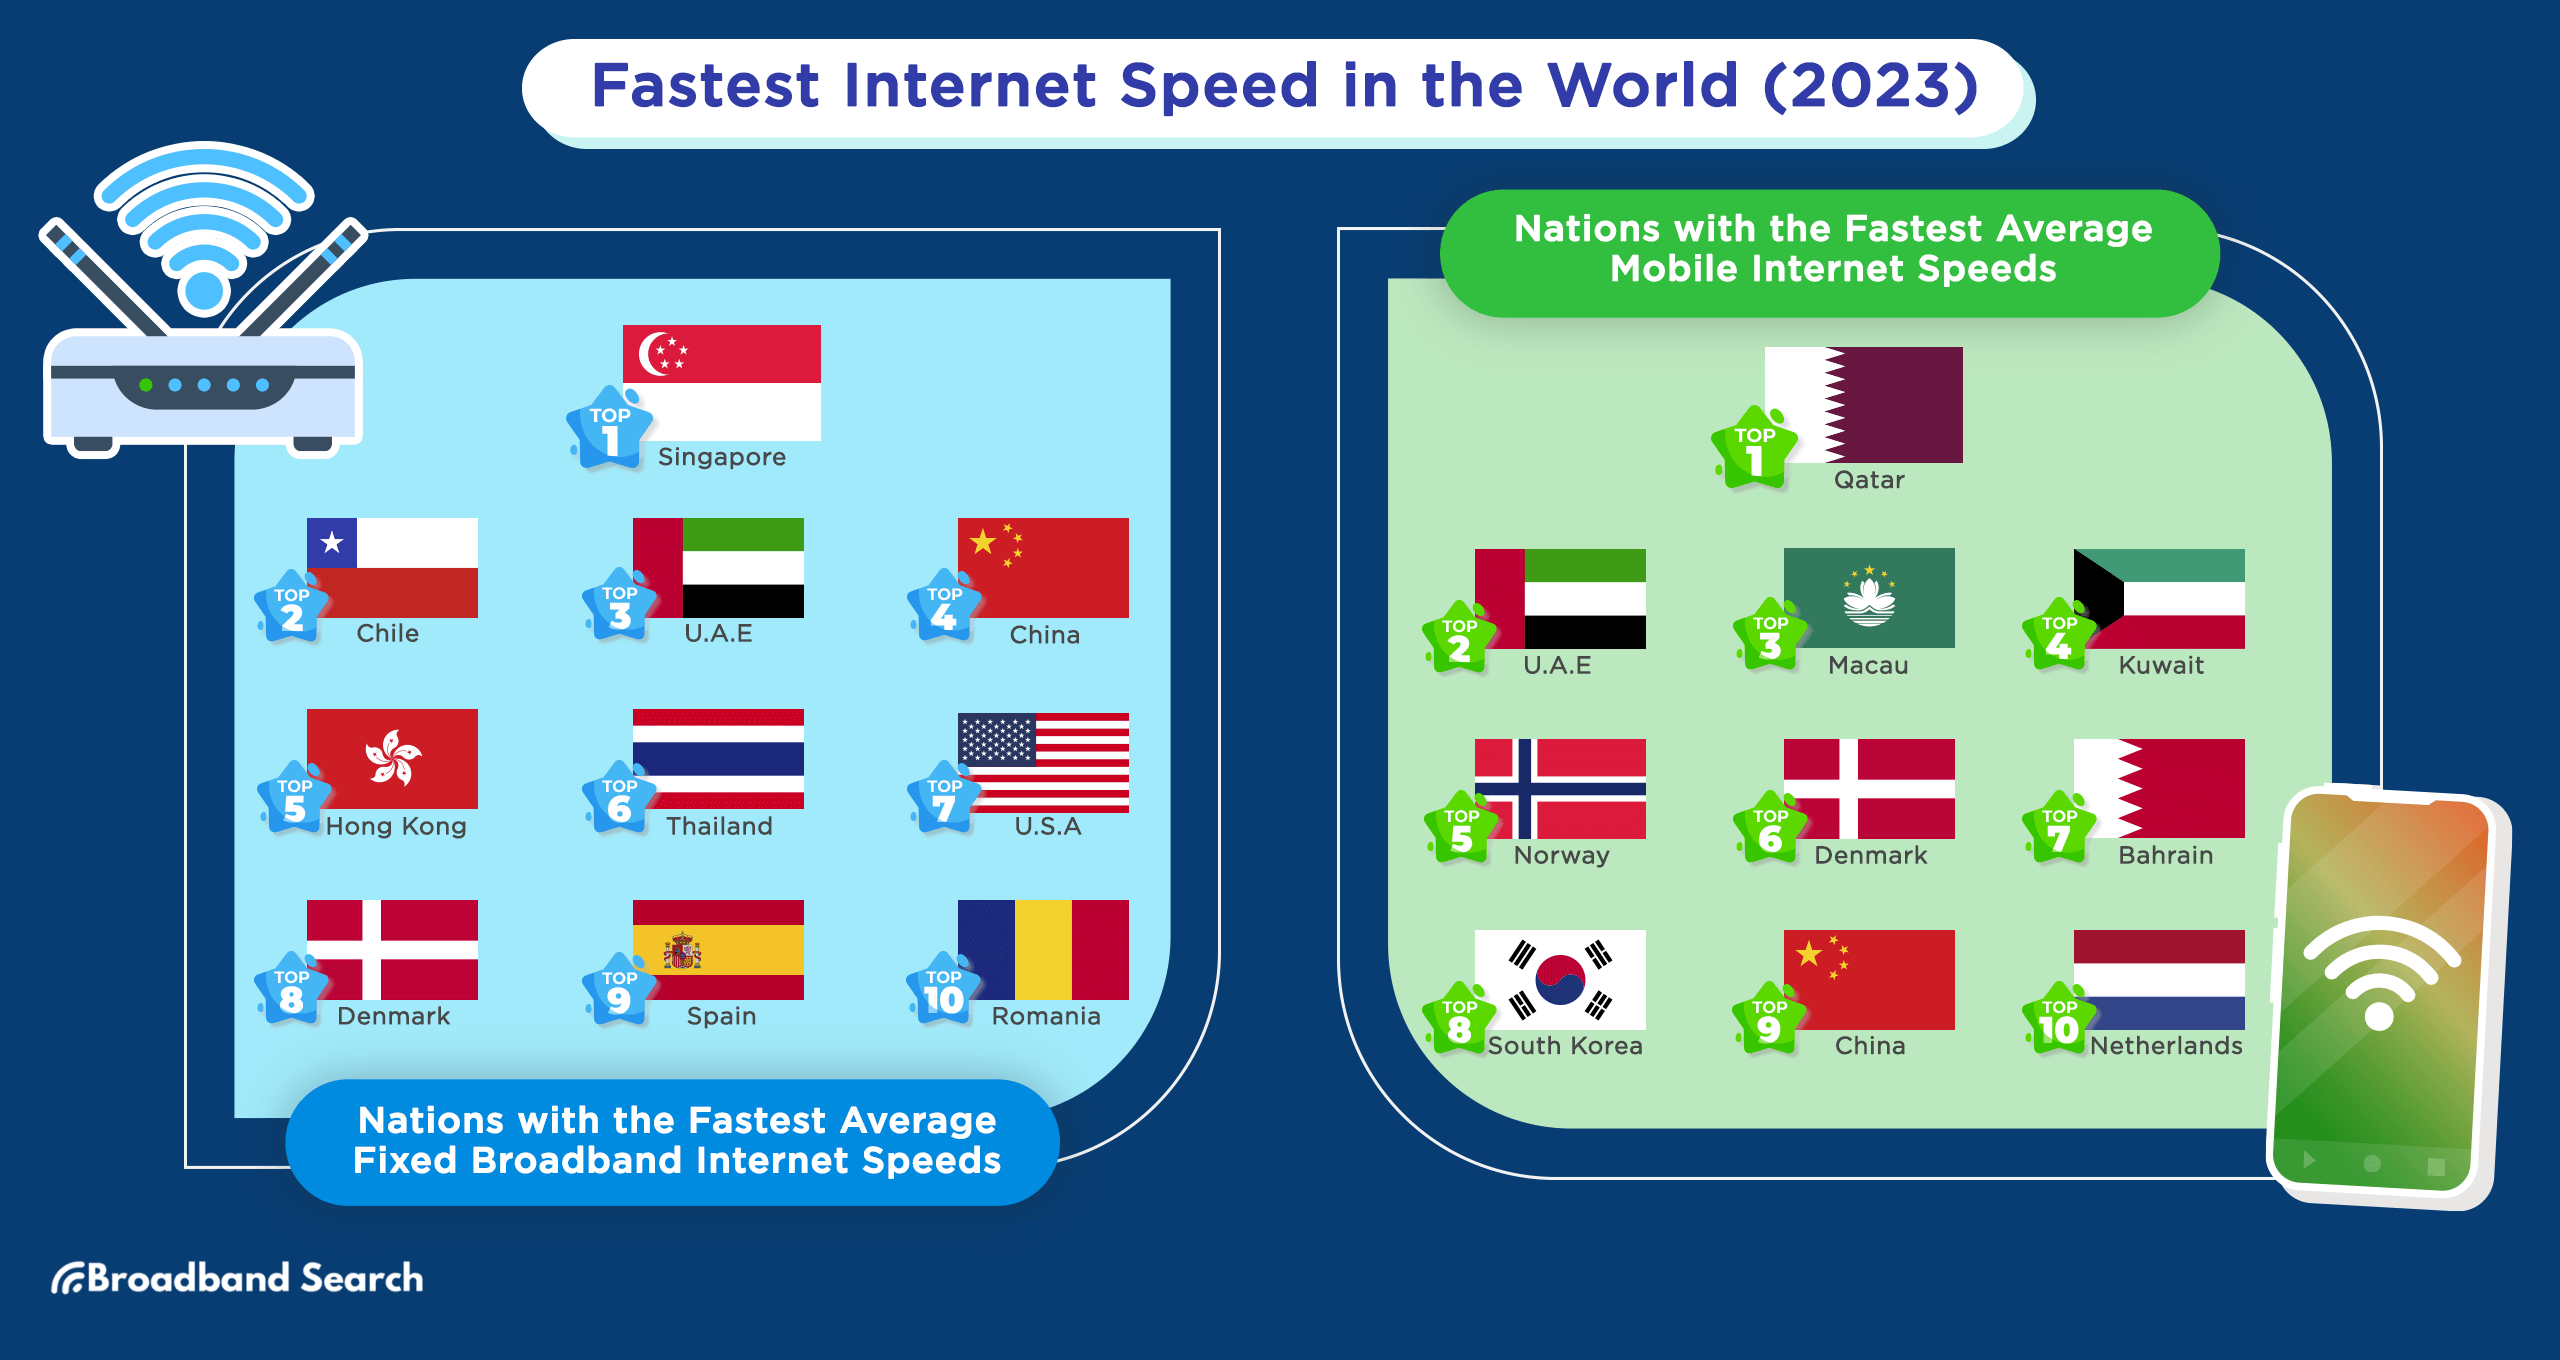 Fastest internet speed in the world in 2023